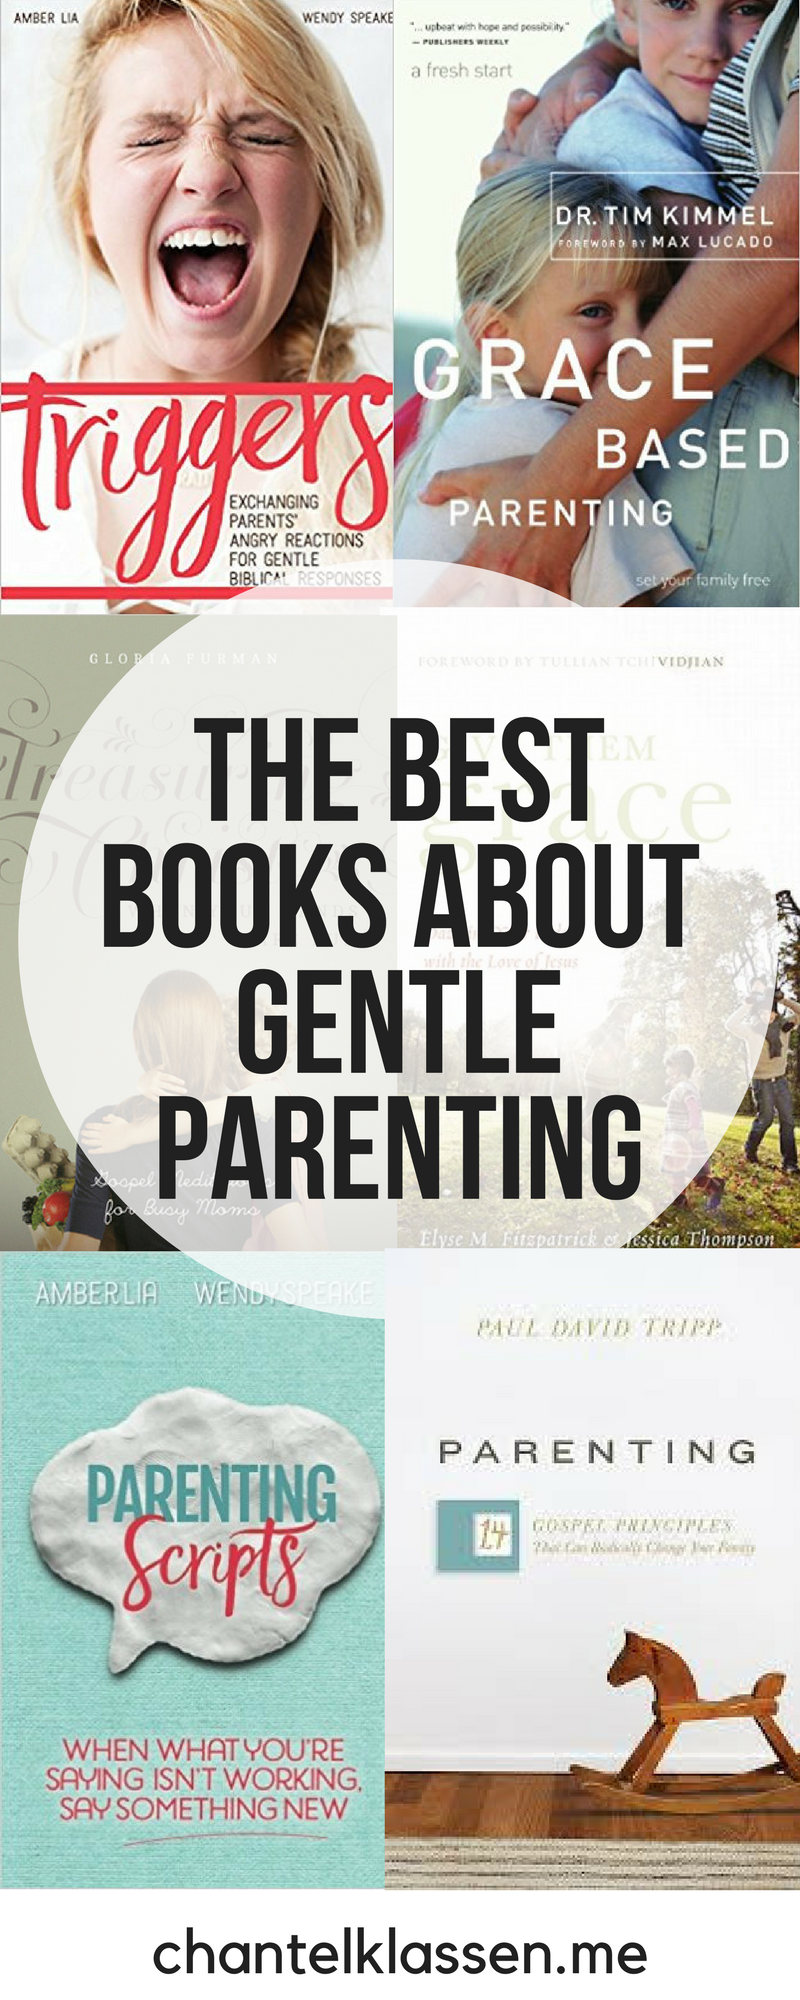 The Best Books About Gentle Parenting